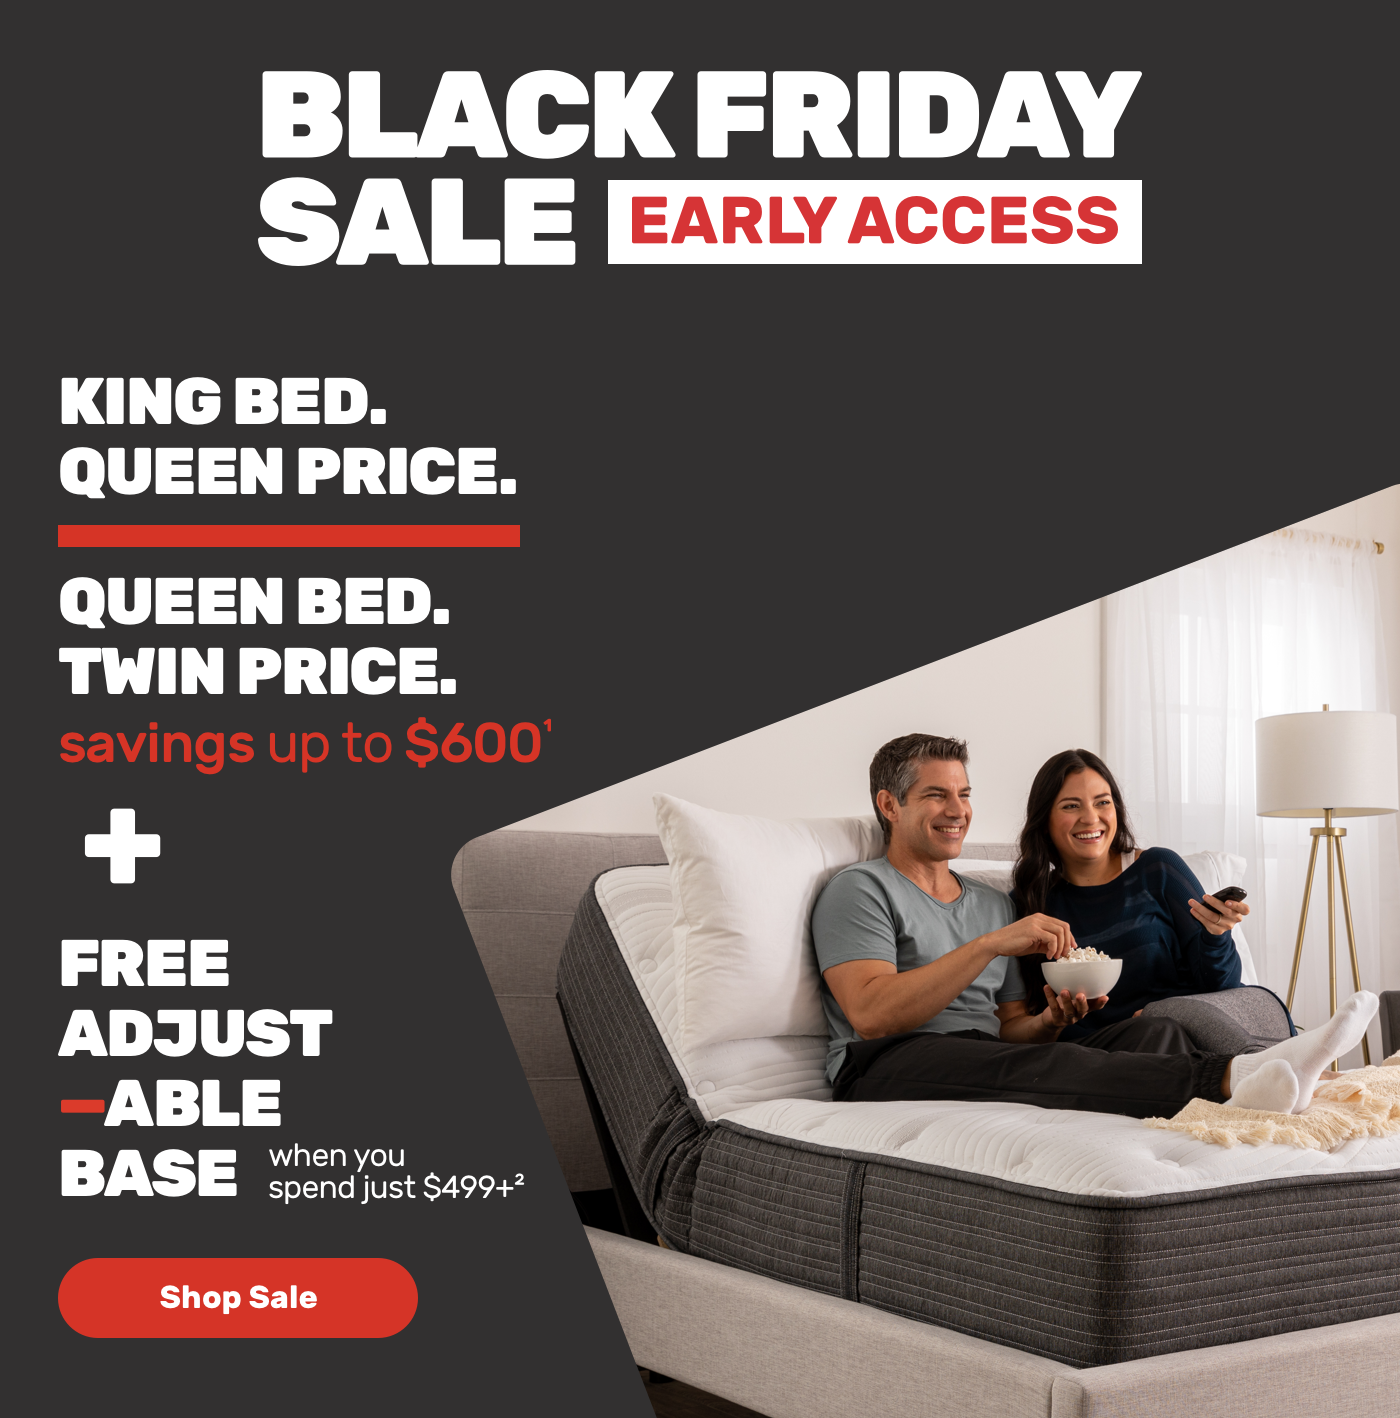 Black Friday Sale Early Access. King Bed. Queen Price. Queen bed. Twin Price. Plus Free Adjustable Base. Shop Sale.